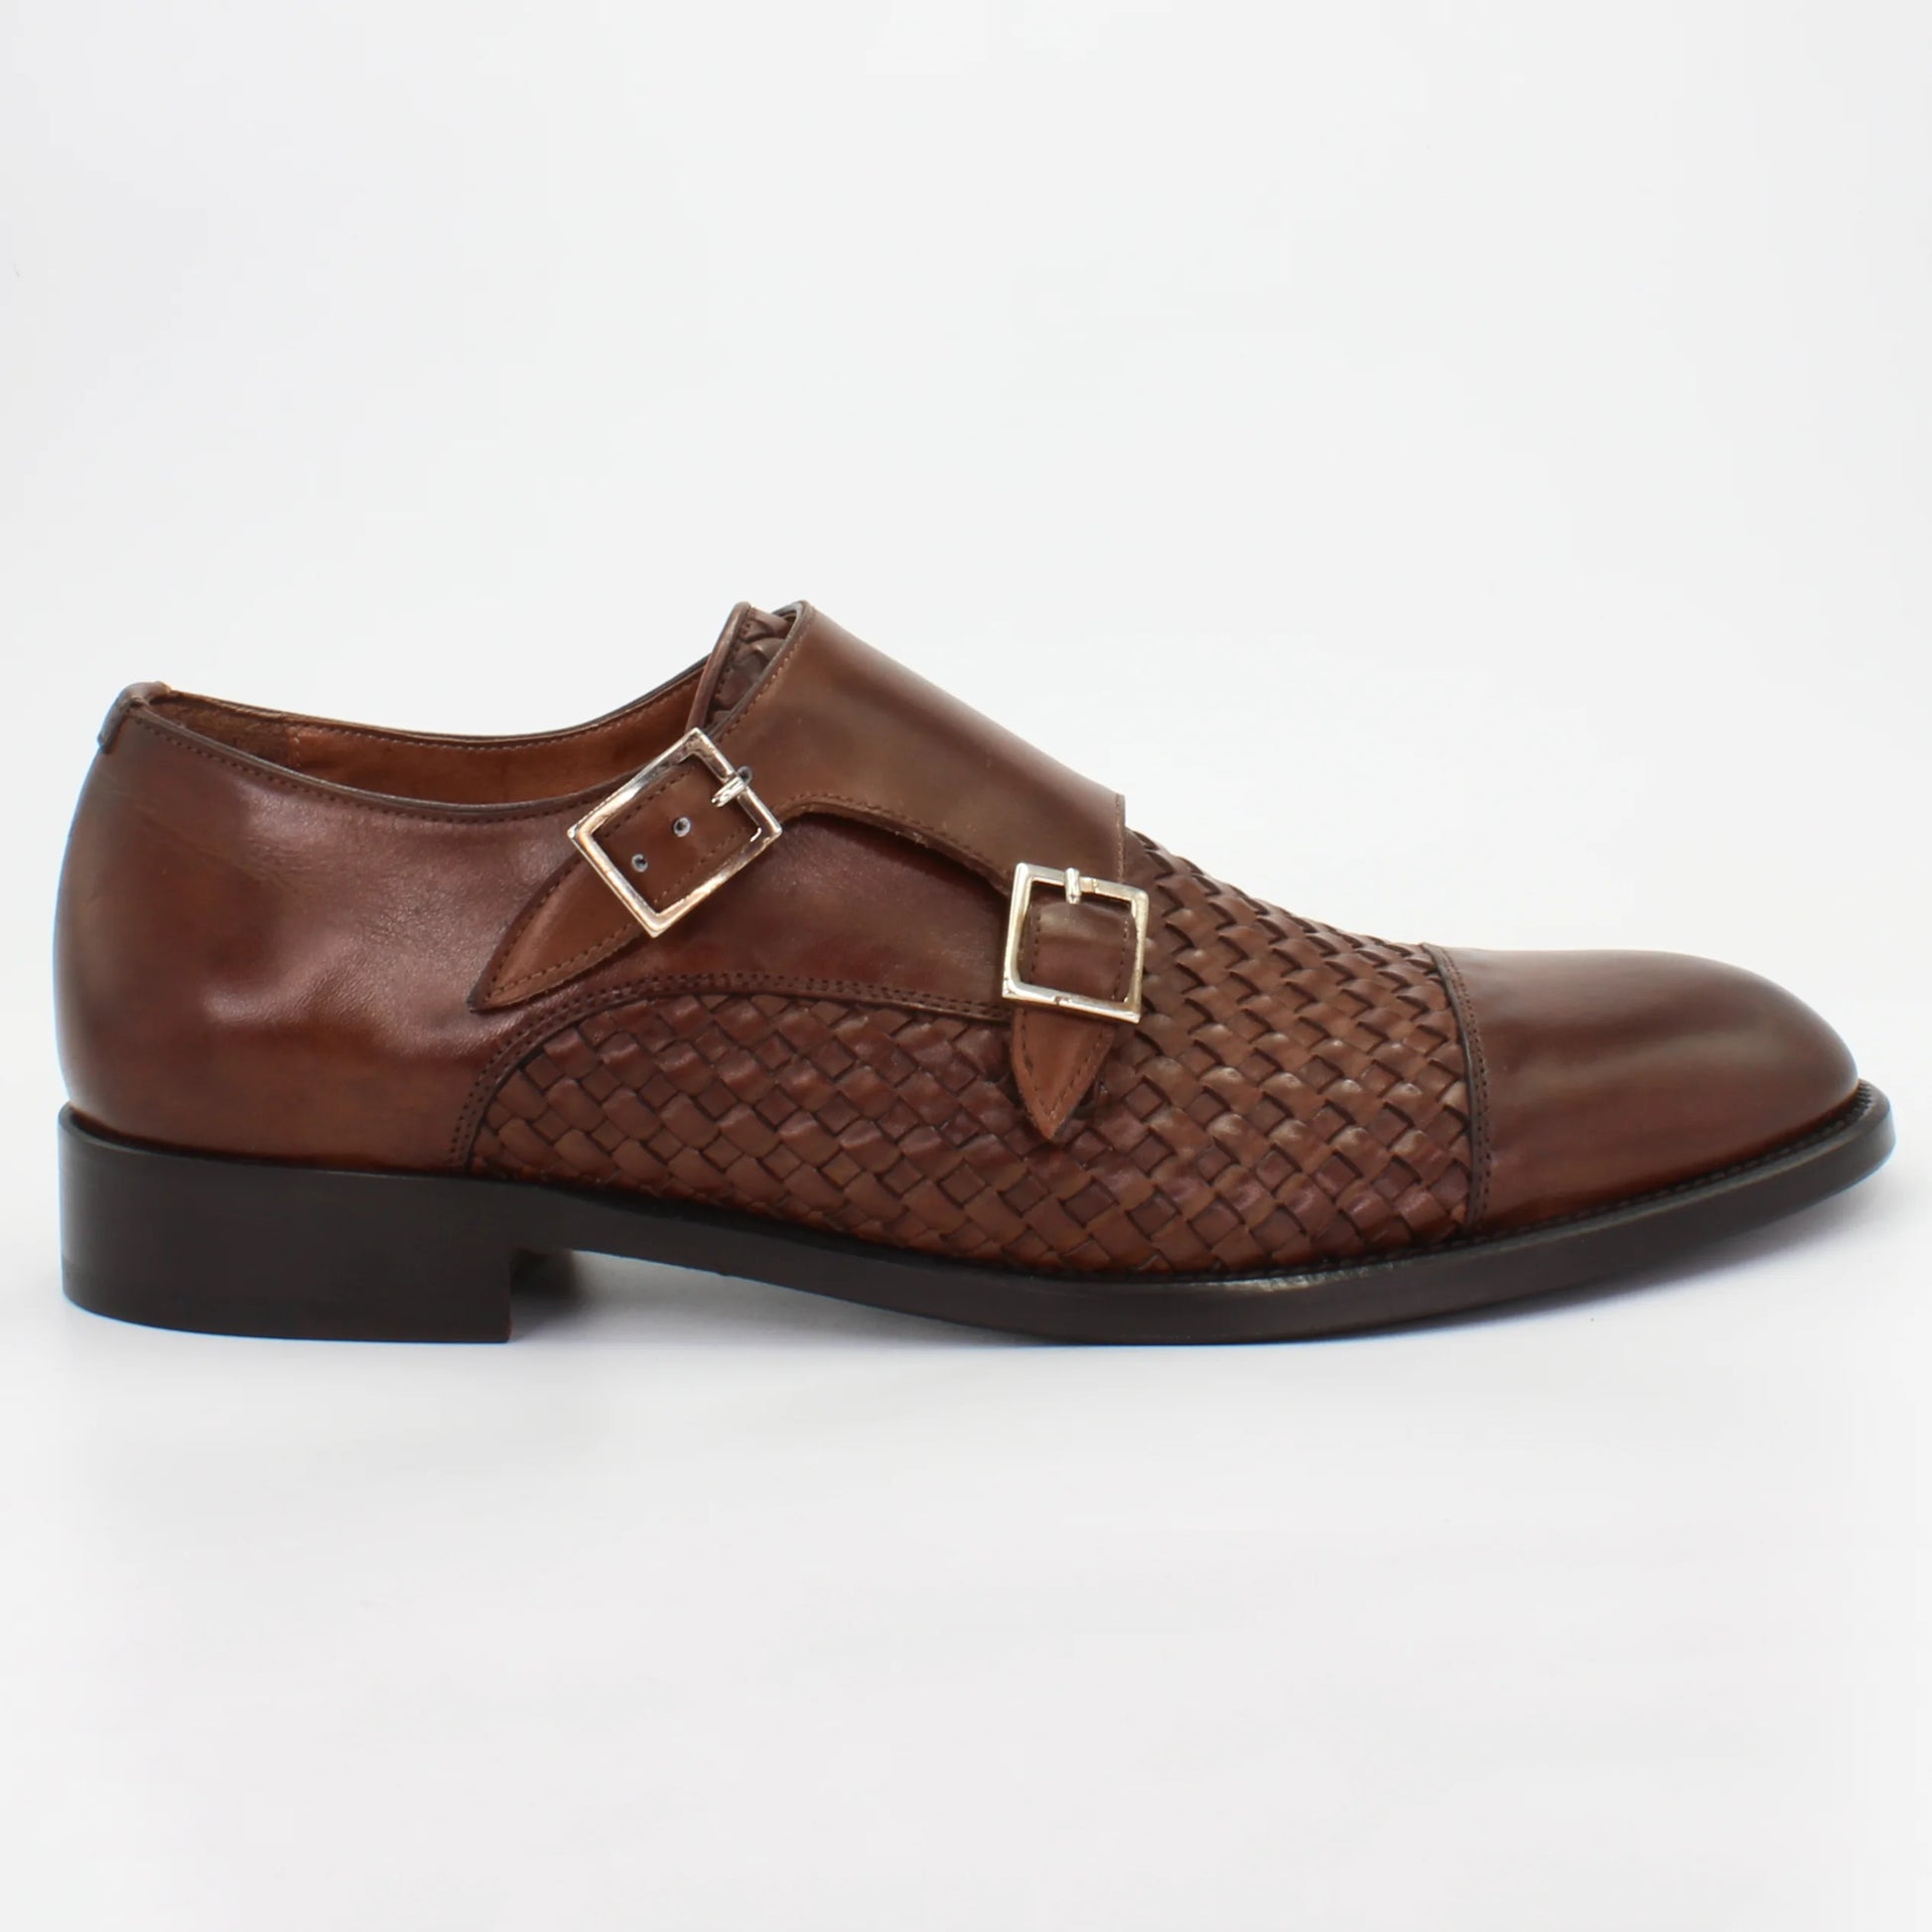 Shop Handmade Italian Leather woven monk strap in testa di moro (BRU11285) or browse our range of hand-made Italian shoes for men in leather or suede in-store at Aliverti Cape Town, or shop online. We deliver in South Africa & offer multiple payment plans as well as accept multiple safe & secure payment methods.